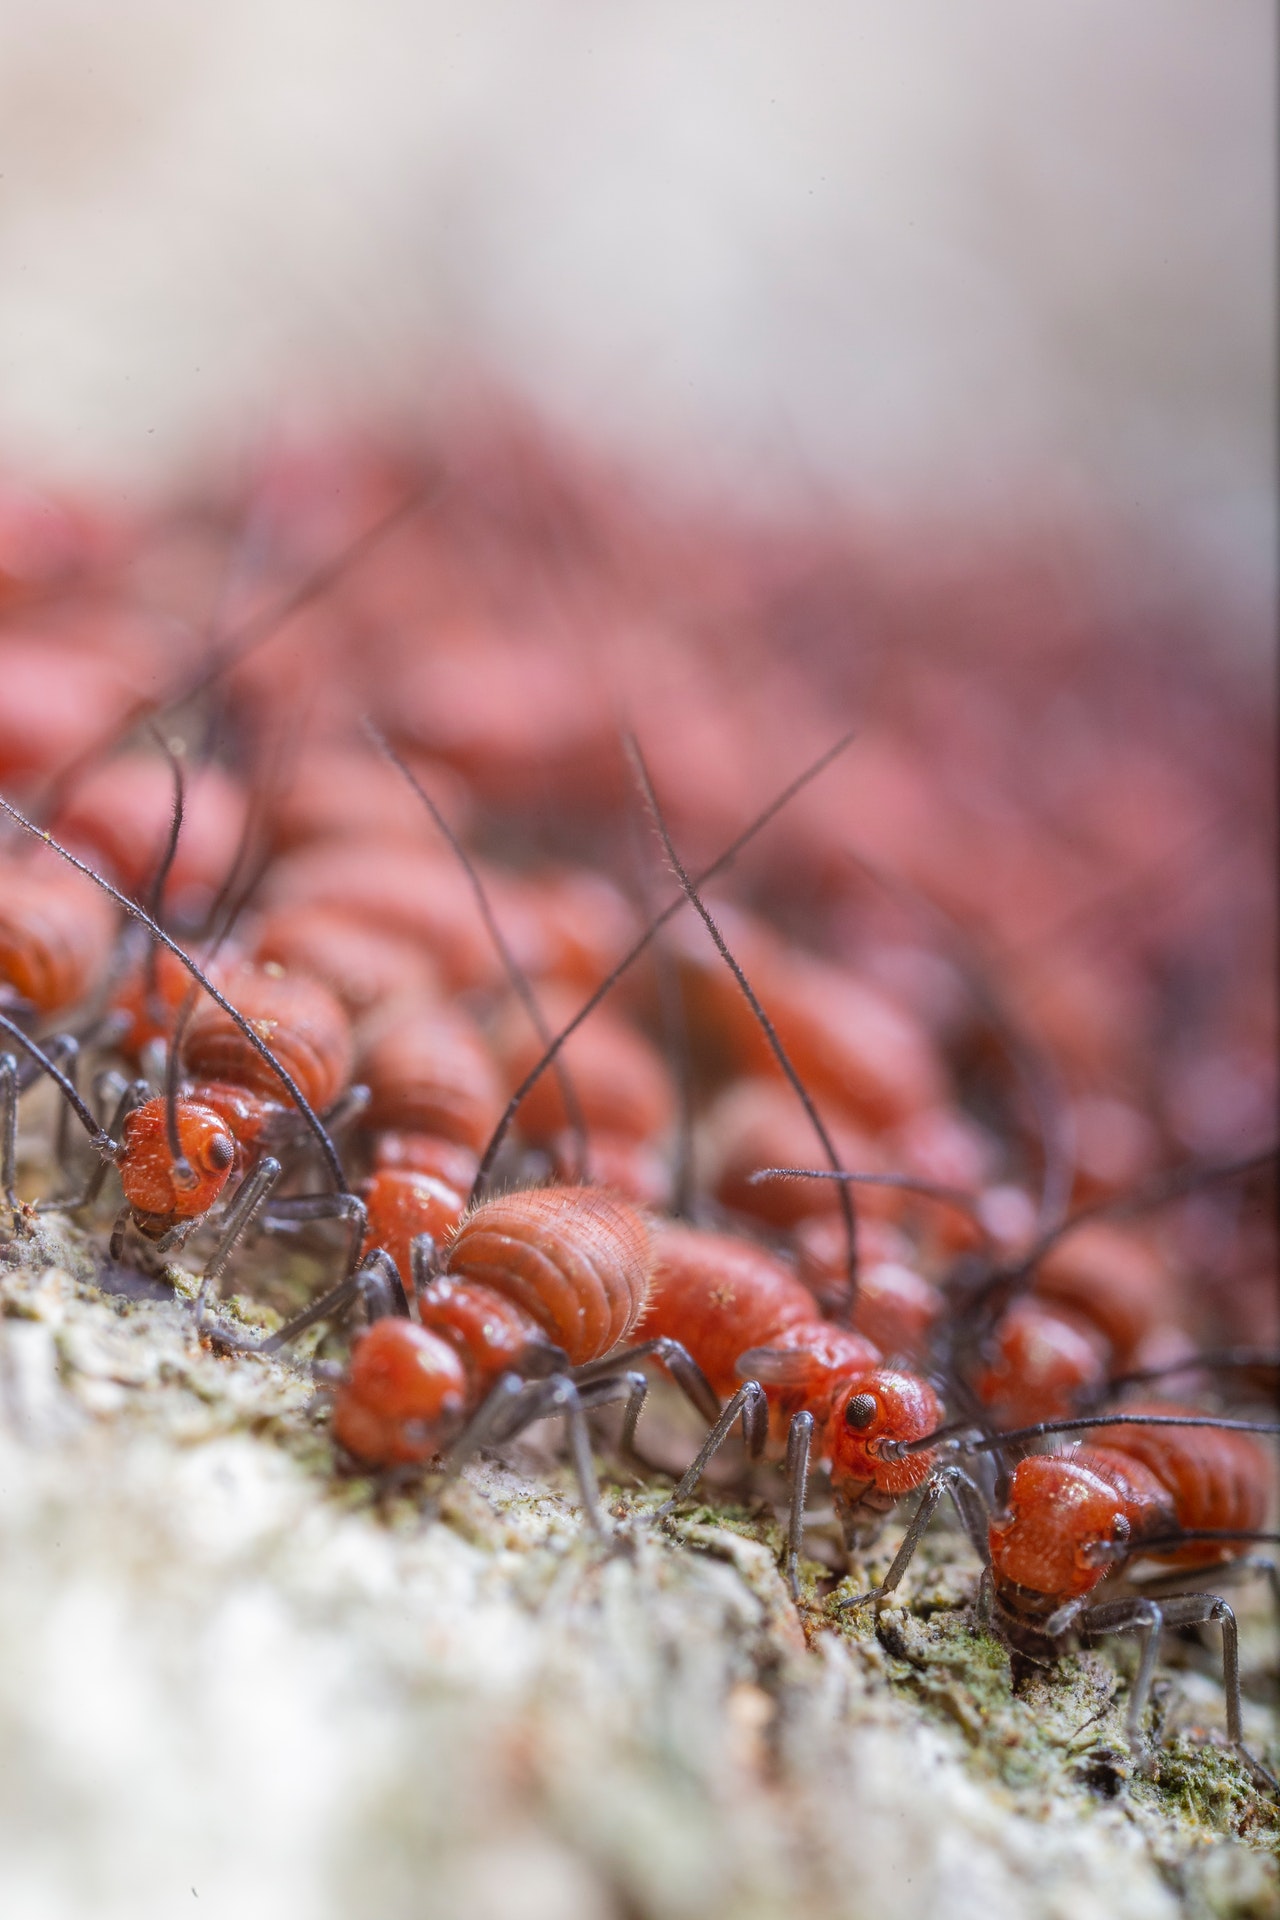 Top 5 Signs of a Termite Infestation in Your Home · Life Made Easier